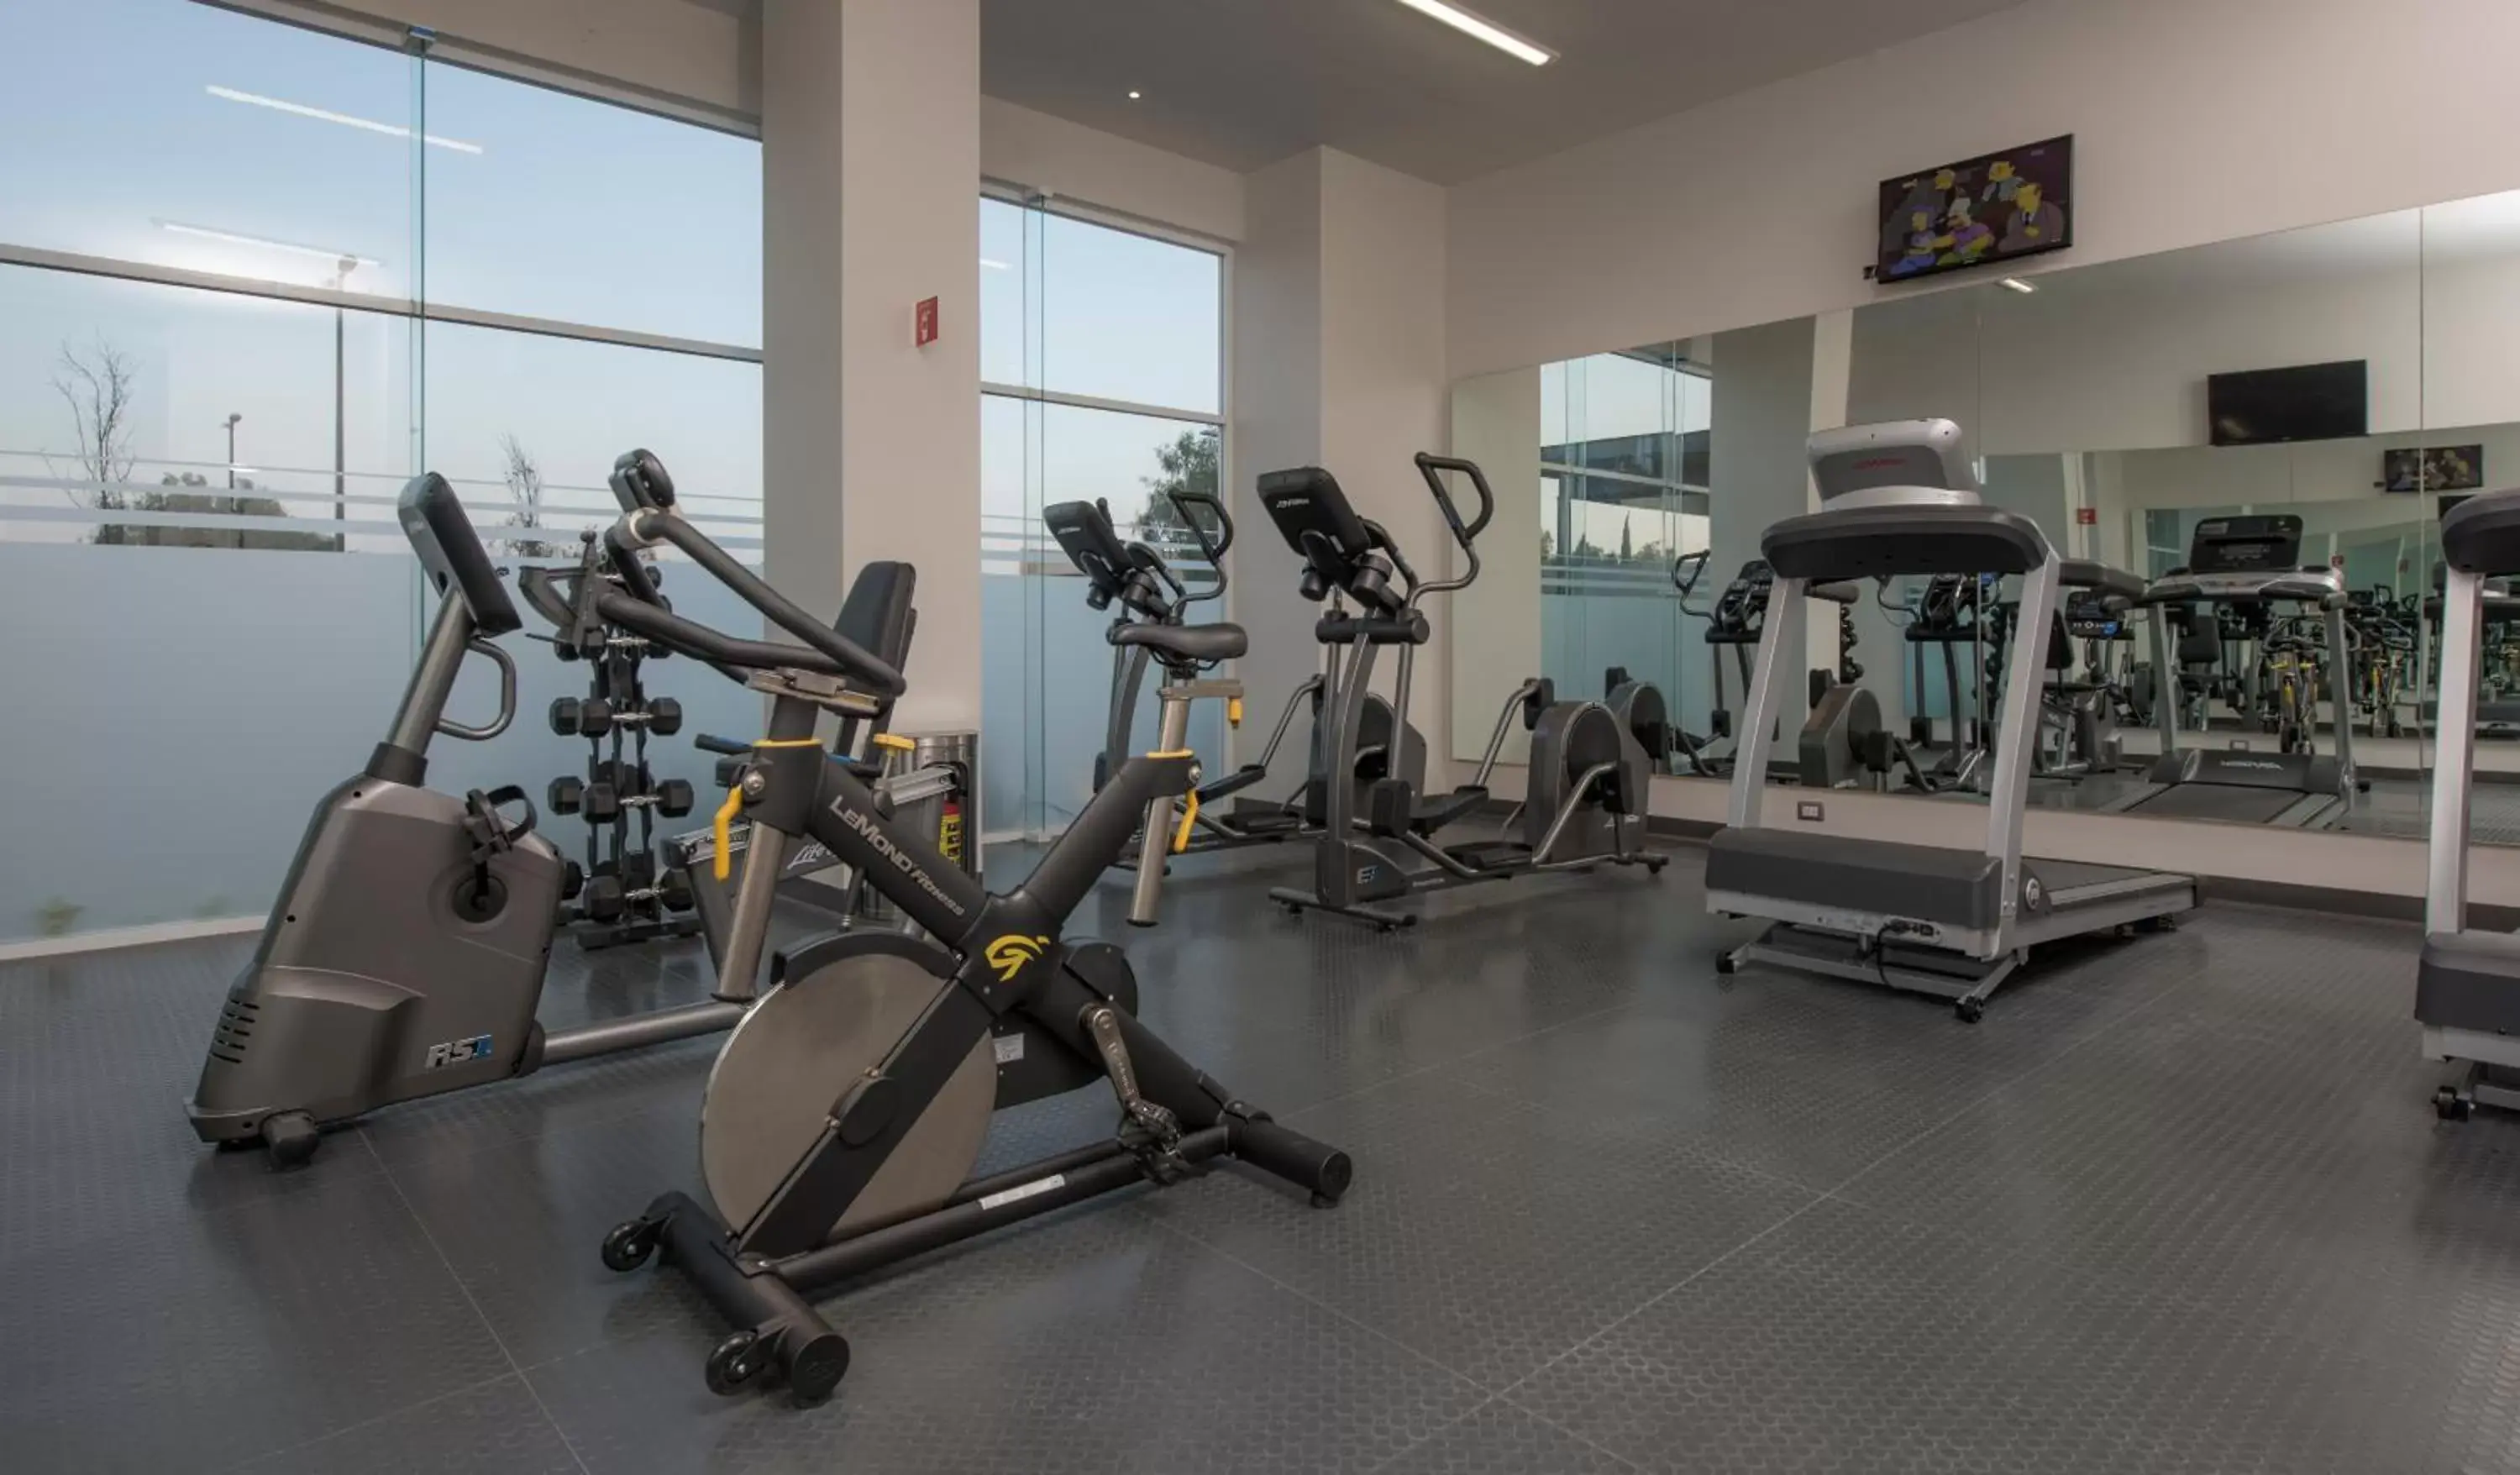 Fitness centre/facilities, Fitness Center/Facilities in Microtel Inn & Suites by Wyndham Irapuato